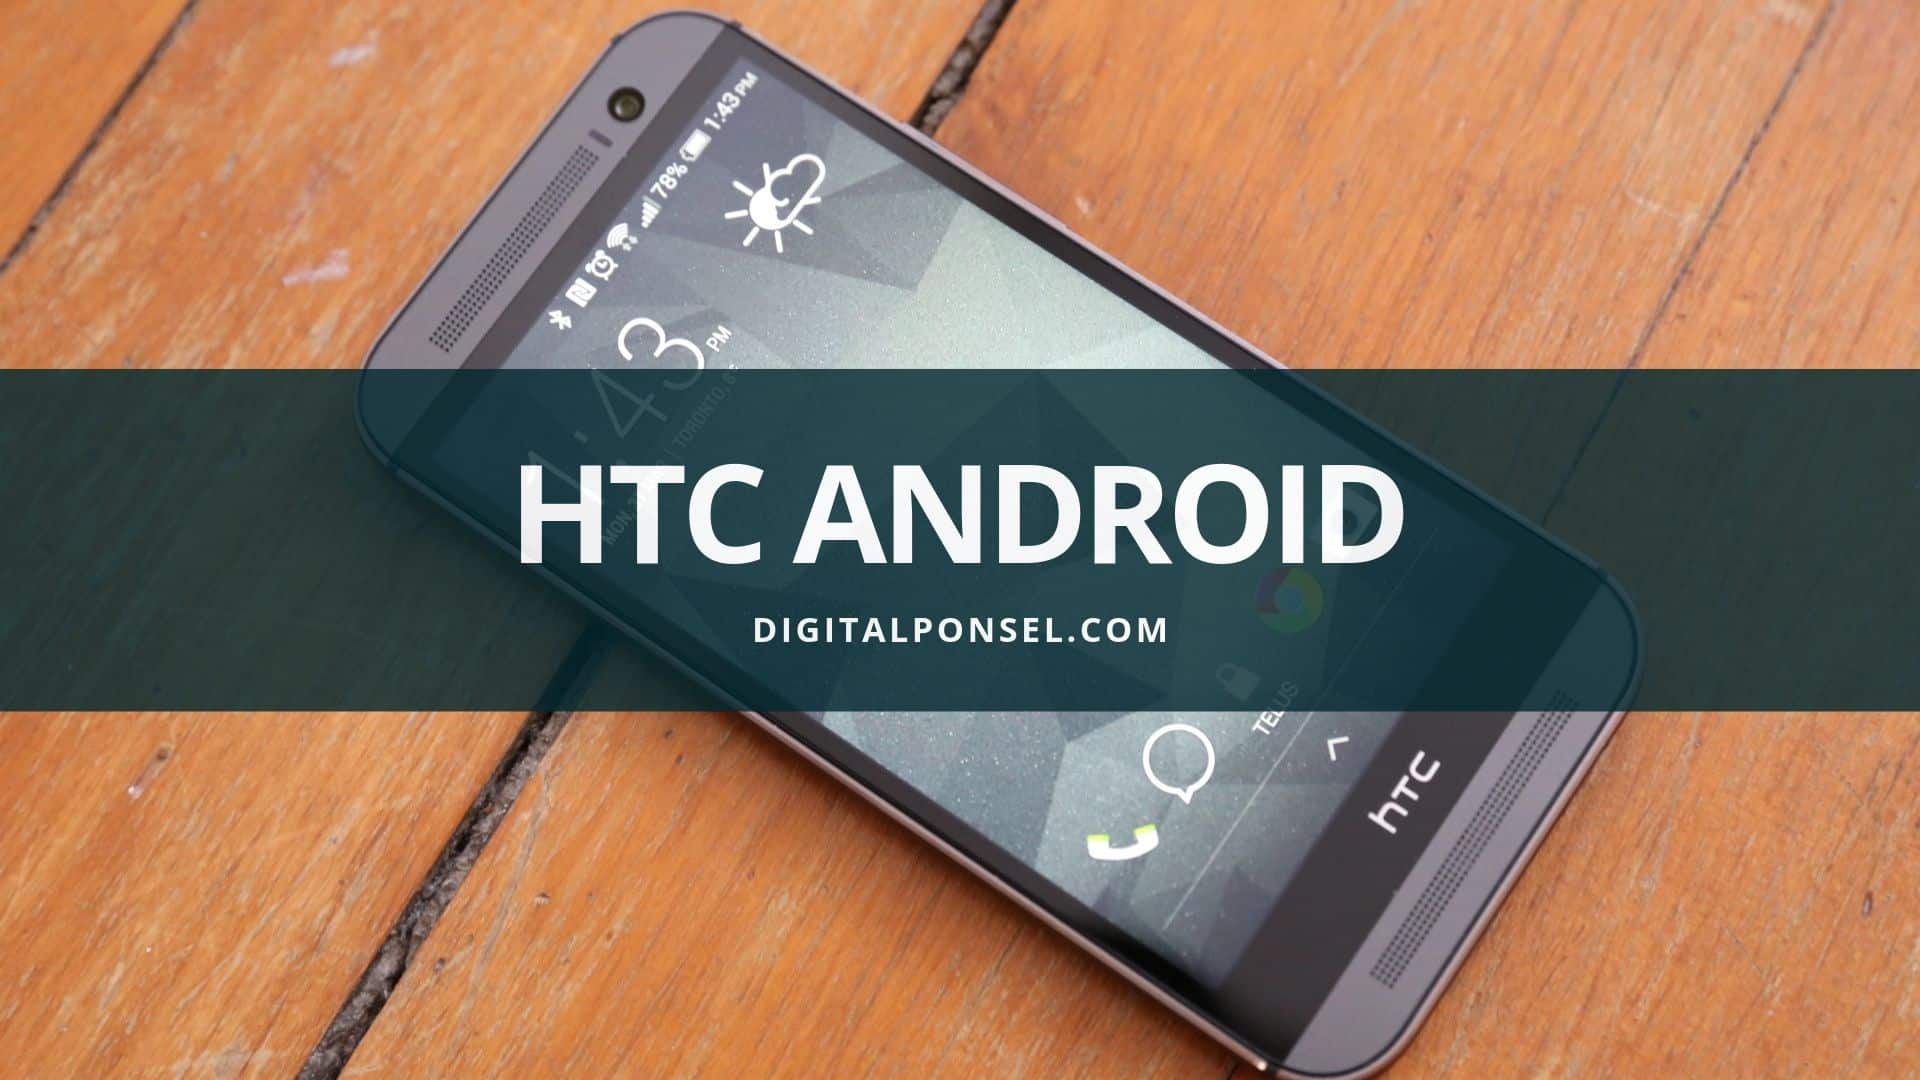 5 Harga HP HTC Android